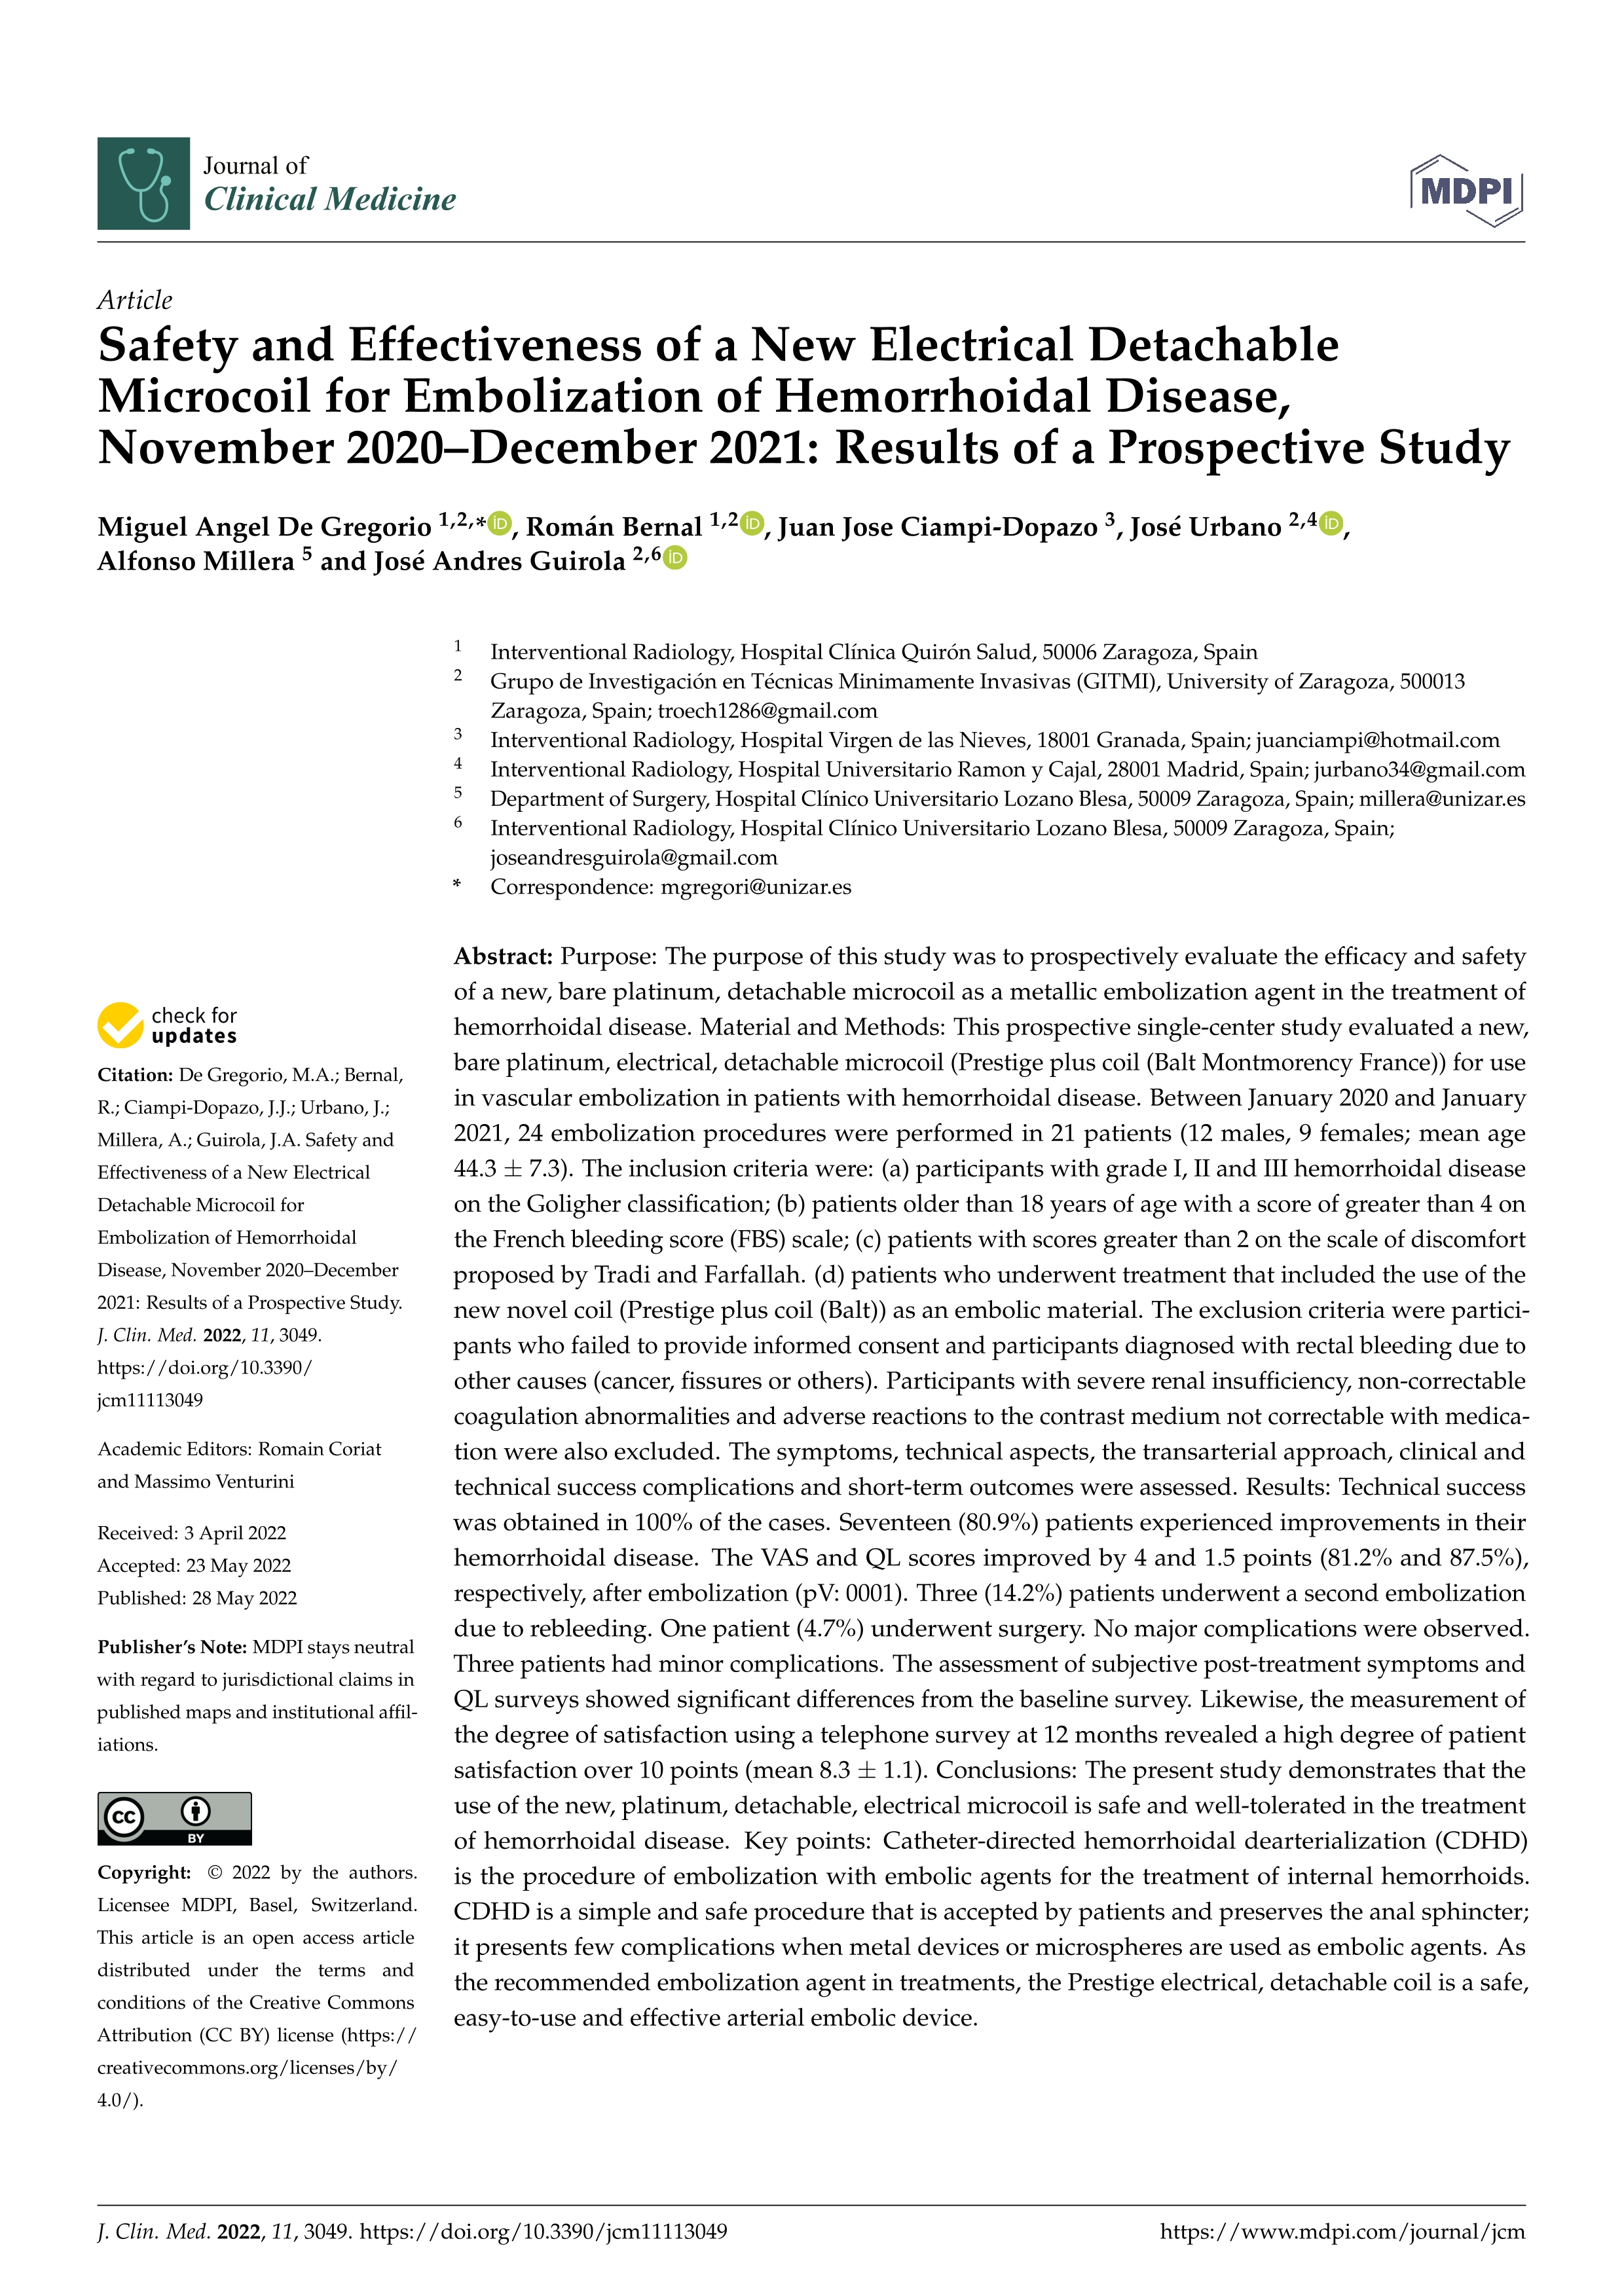 Safety and effectiveness of a new electrical detachable microcoil for embolization of hemorrhoidal disease, November 2020–December 2021: results of a prospective study